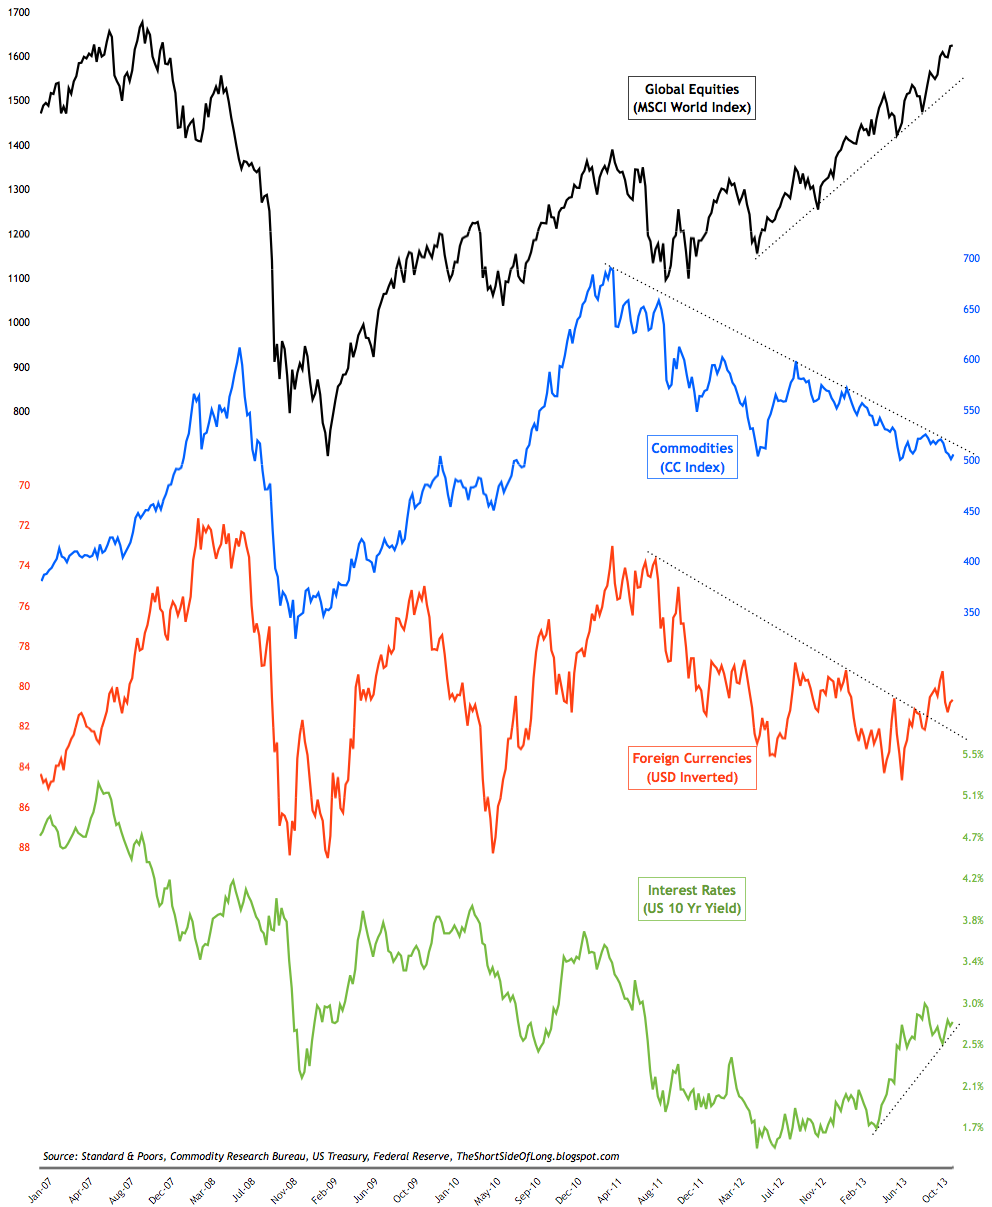 Global Equities vs. Other Asset Classes